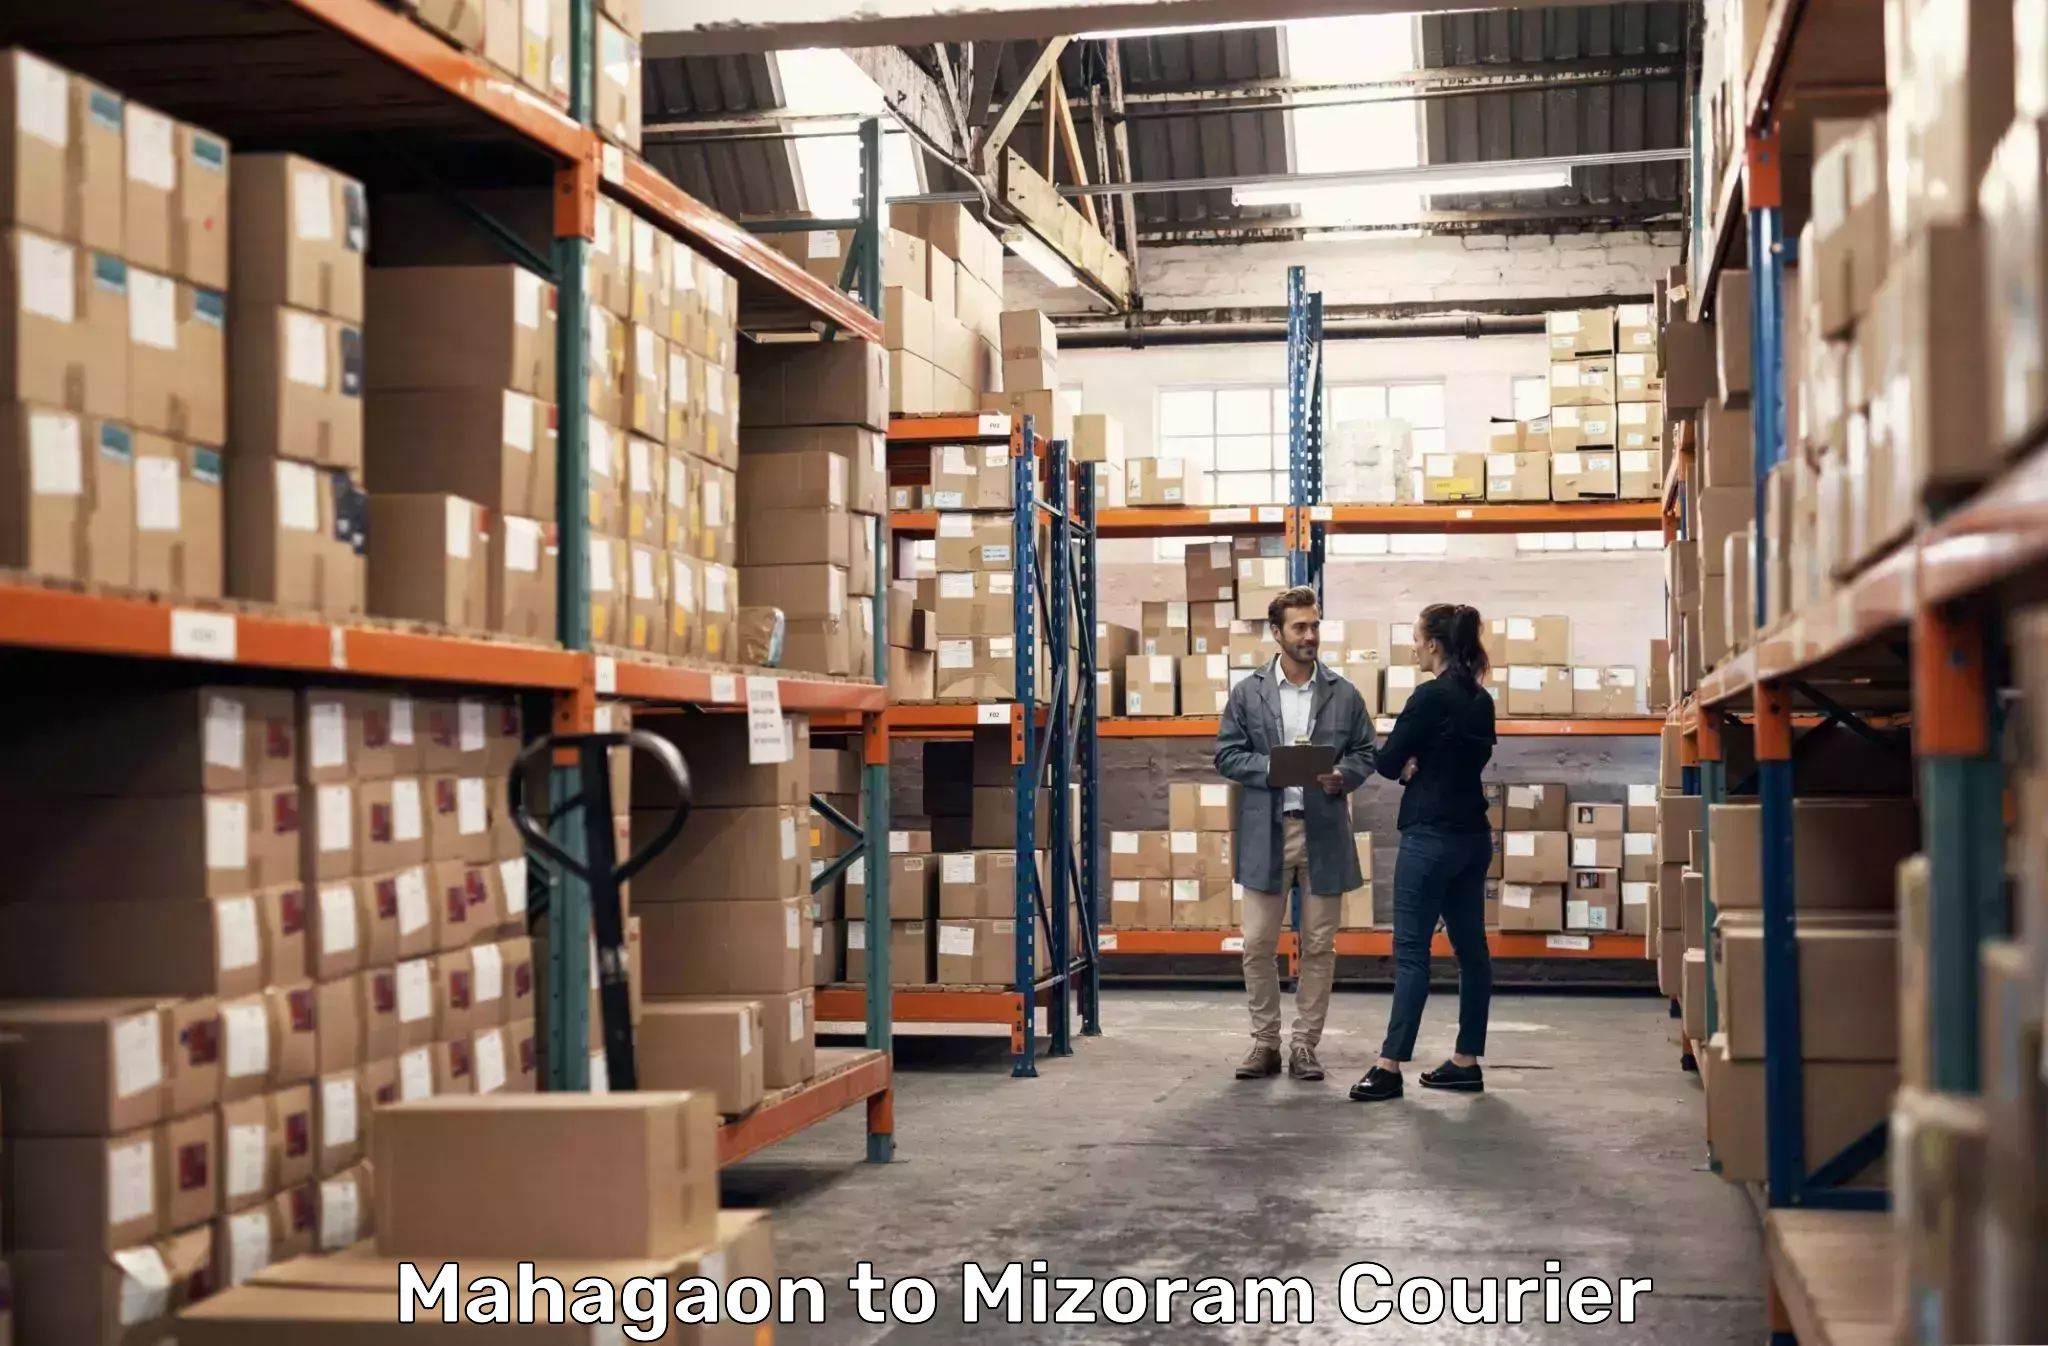 State-of-the-art courier technology Mahagaon to Mizoram